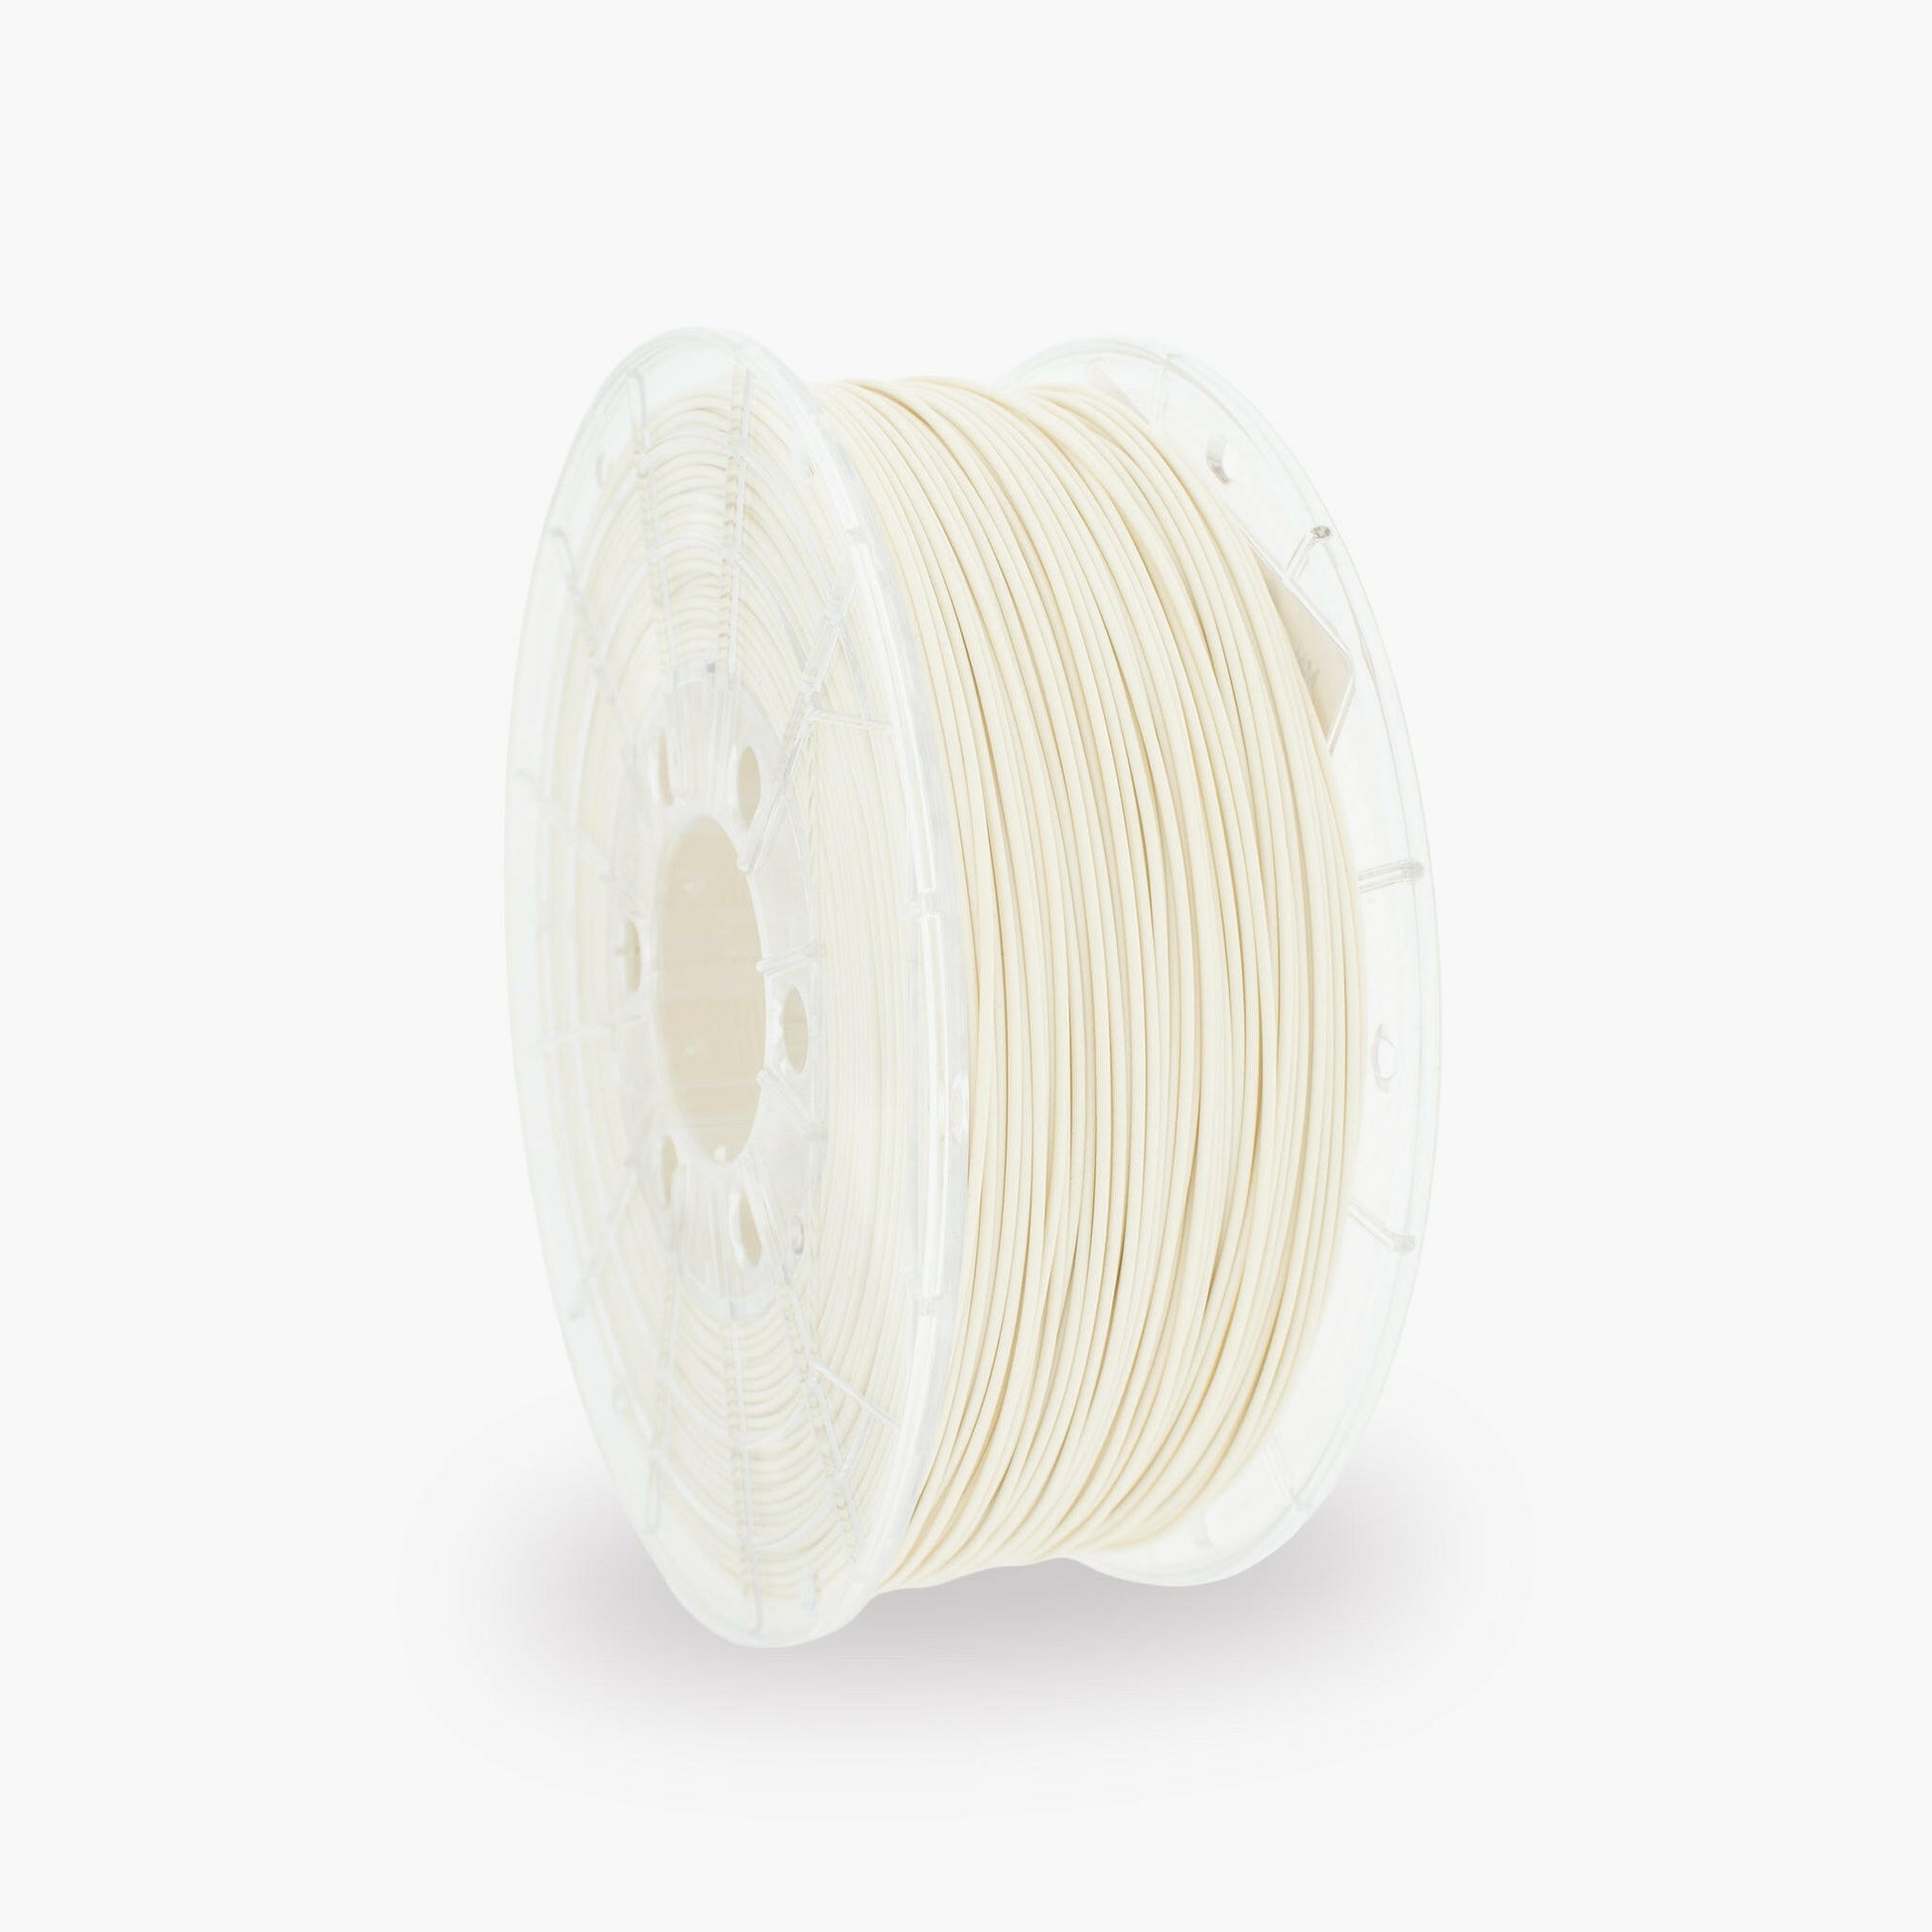 Cream PETG 3D Printer Filament with a diameter of 1.75mm on a 1KG Spool.